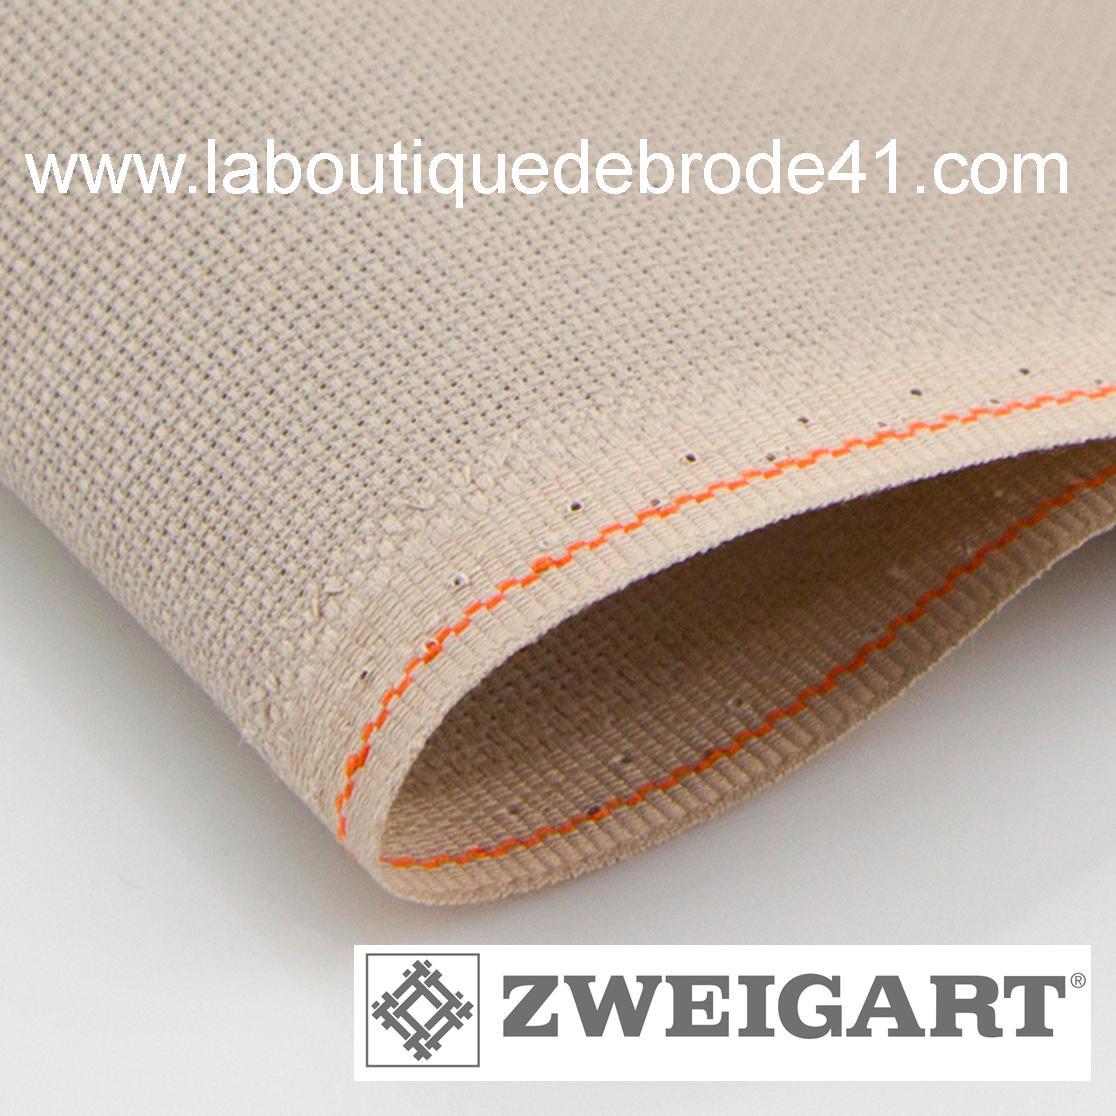 Toile a broder zweigart extra fine aida 8 pts 3326 nougat 3021